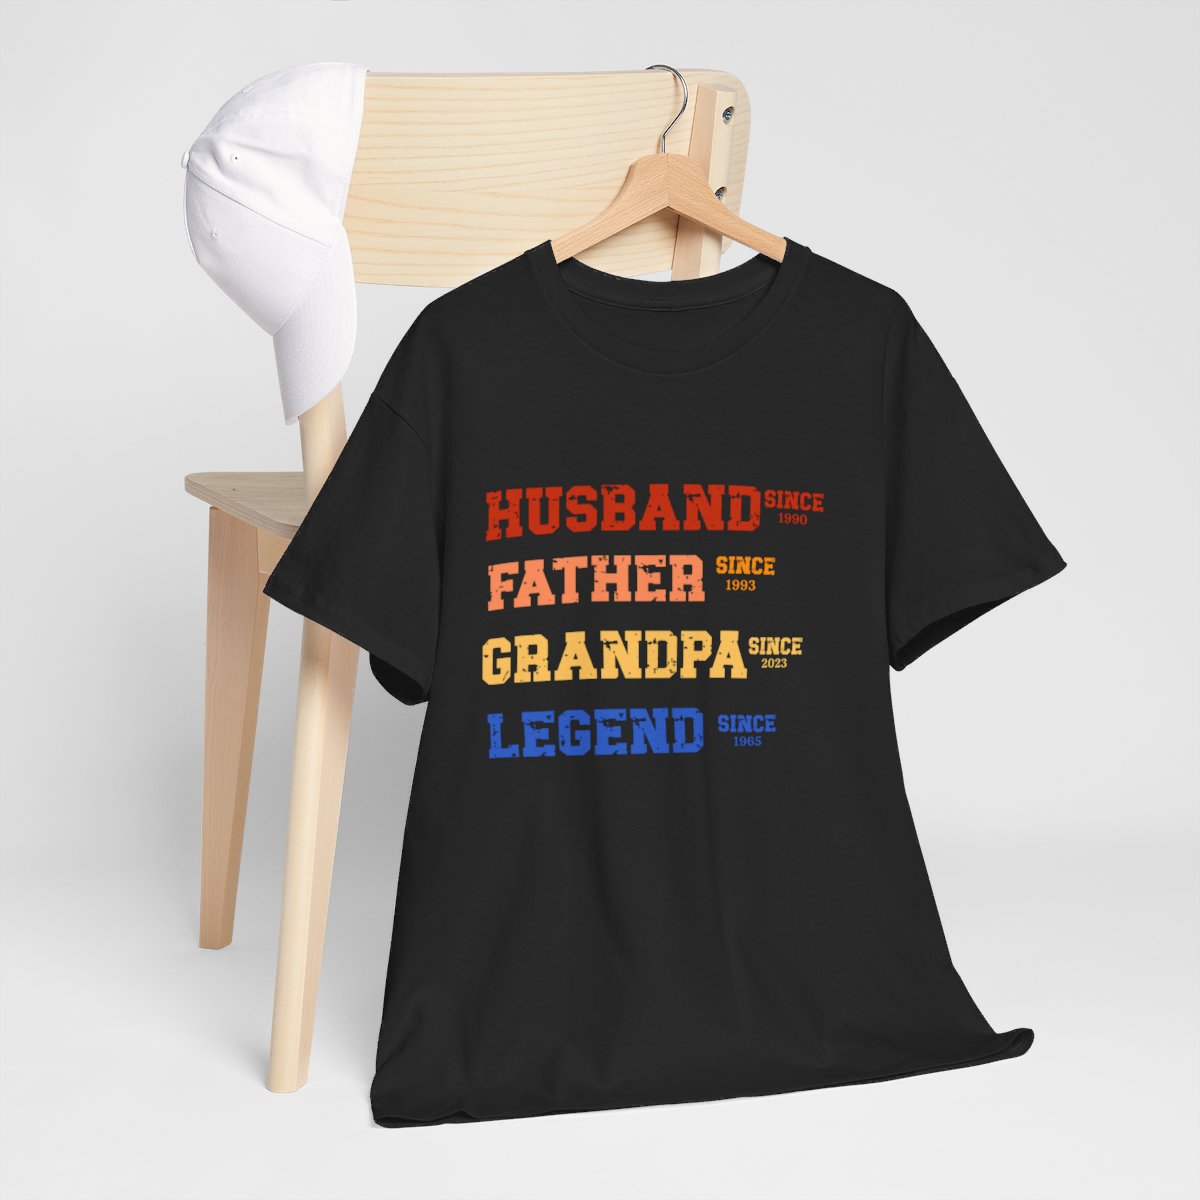 Get trendy with Husband, Father, Grandfather , Legend Unisex Heavy Cotton Tee -  available at Good Gift Company. Grab yours for $17.34 today!